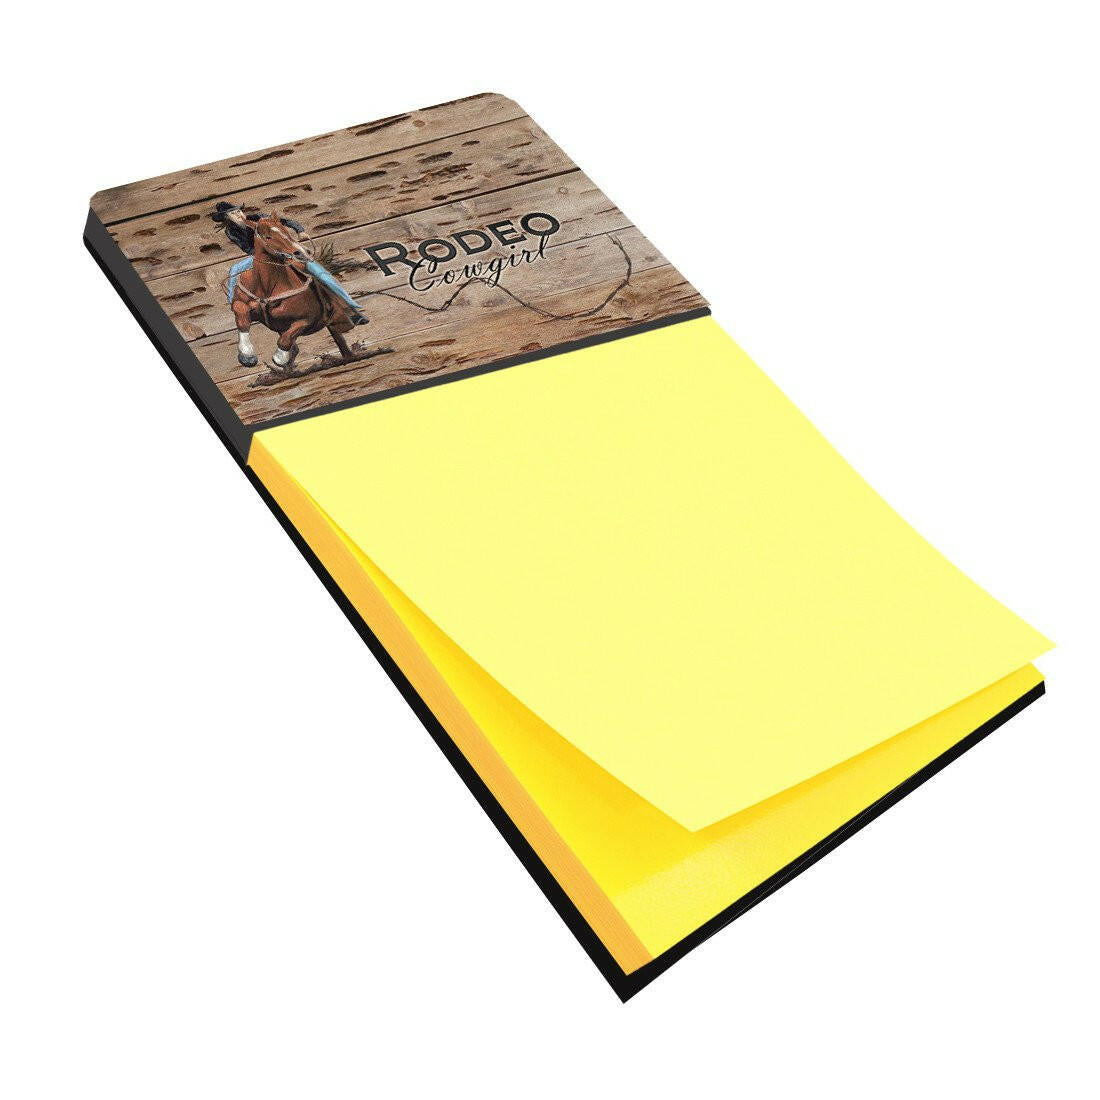 Rodeo Cowgirl Barrel Racer Refiillable Sticky Note Holder or Postit Note Dispenser SB3055SN by Caroline's Treasures